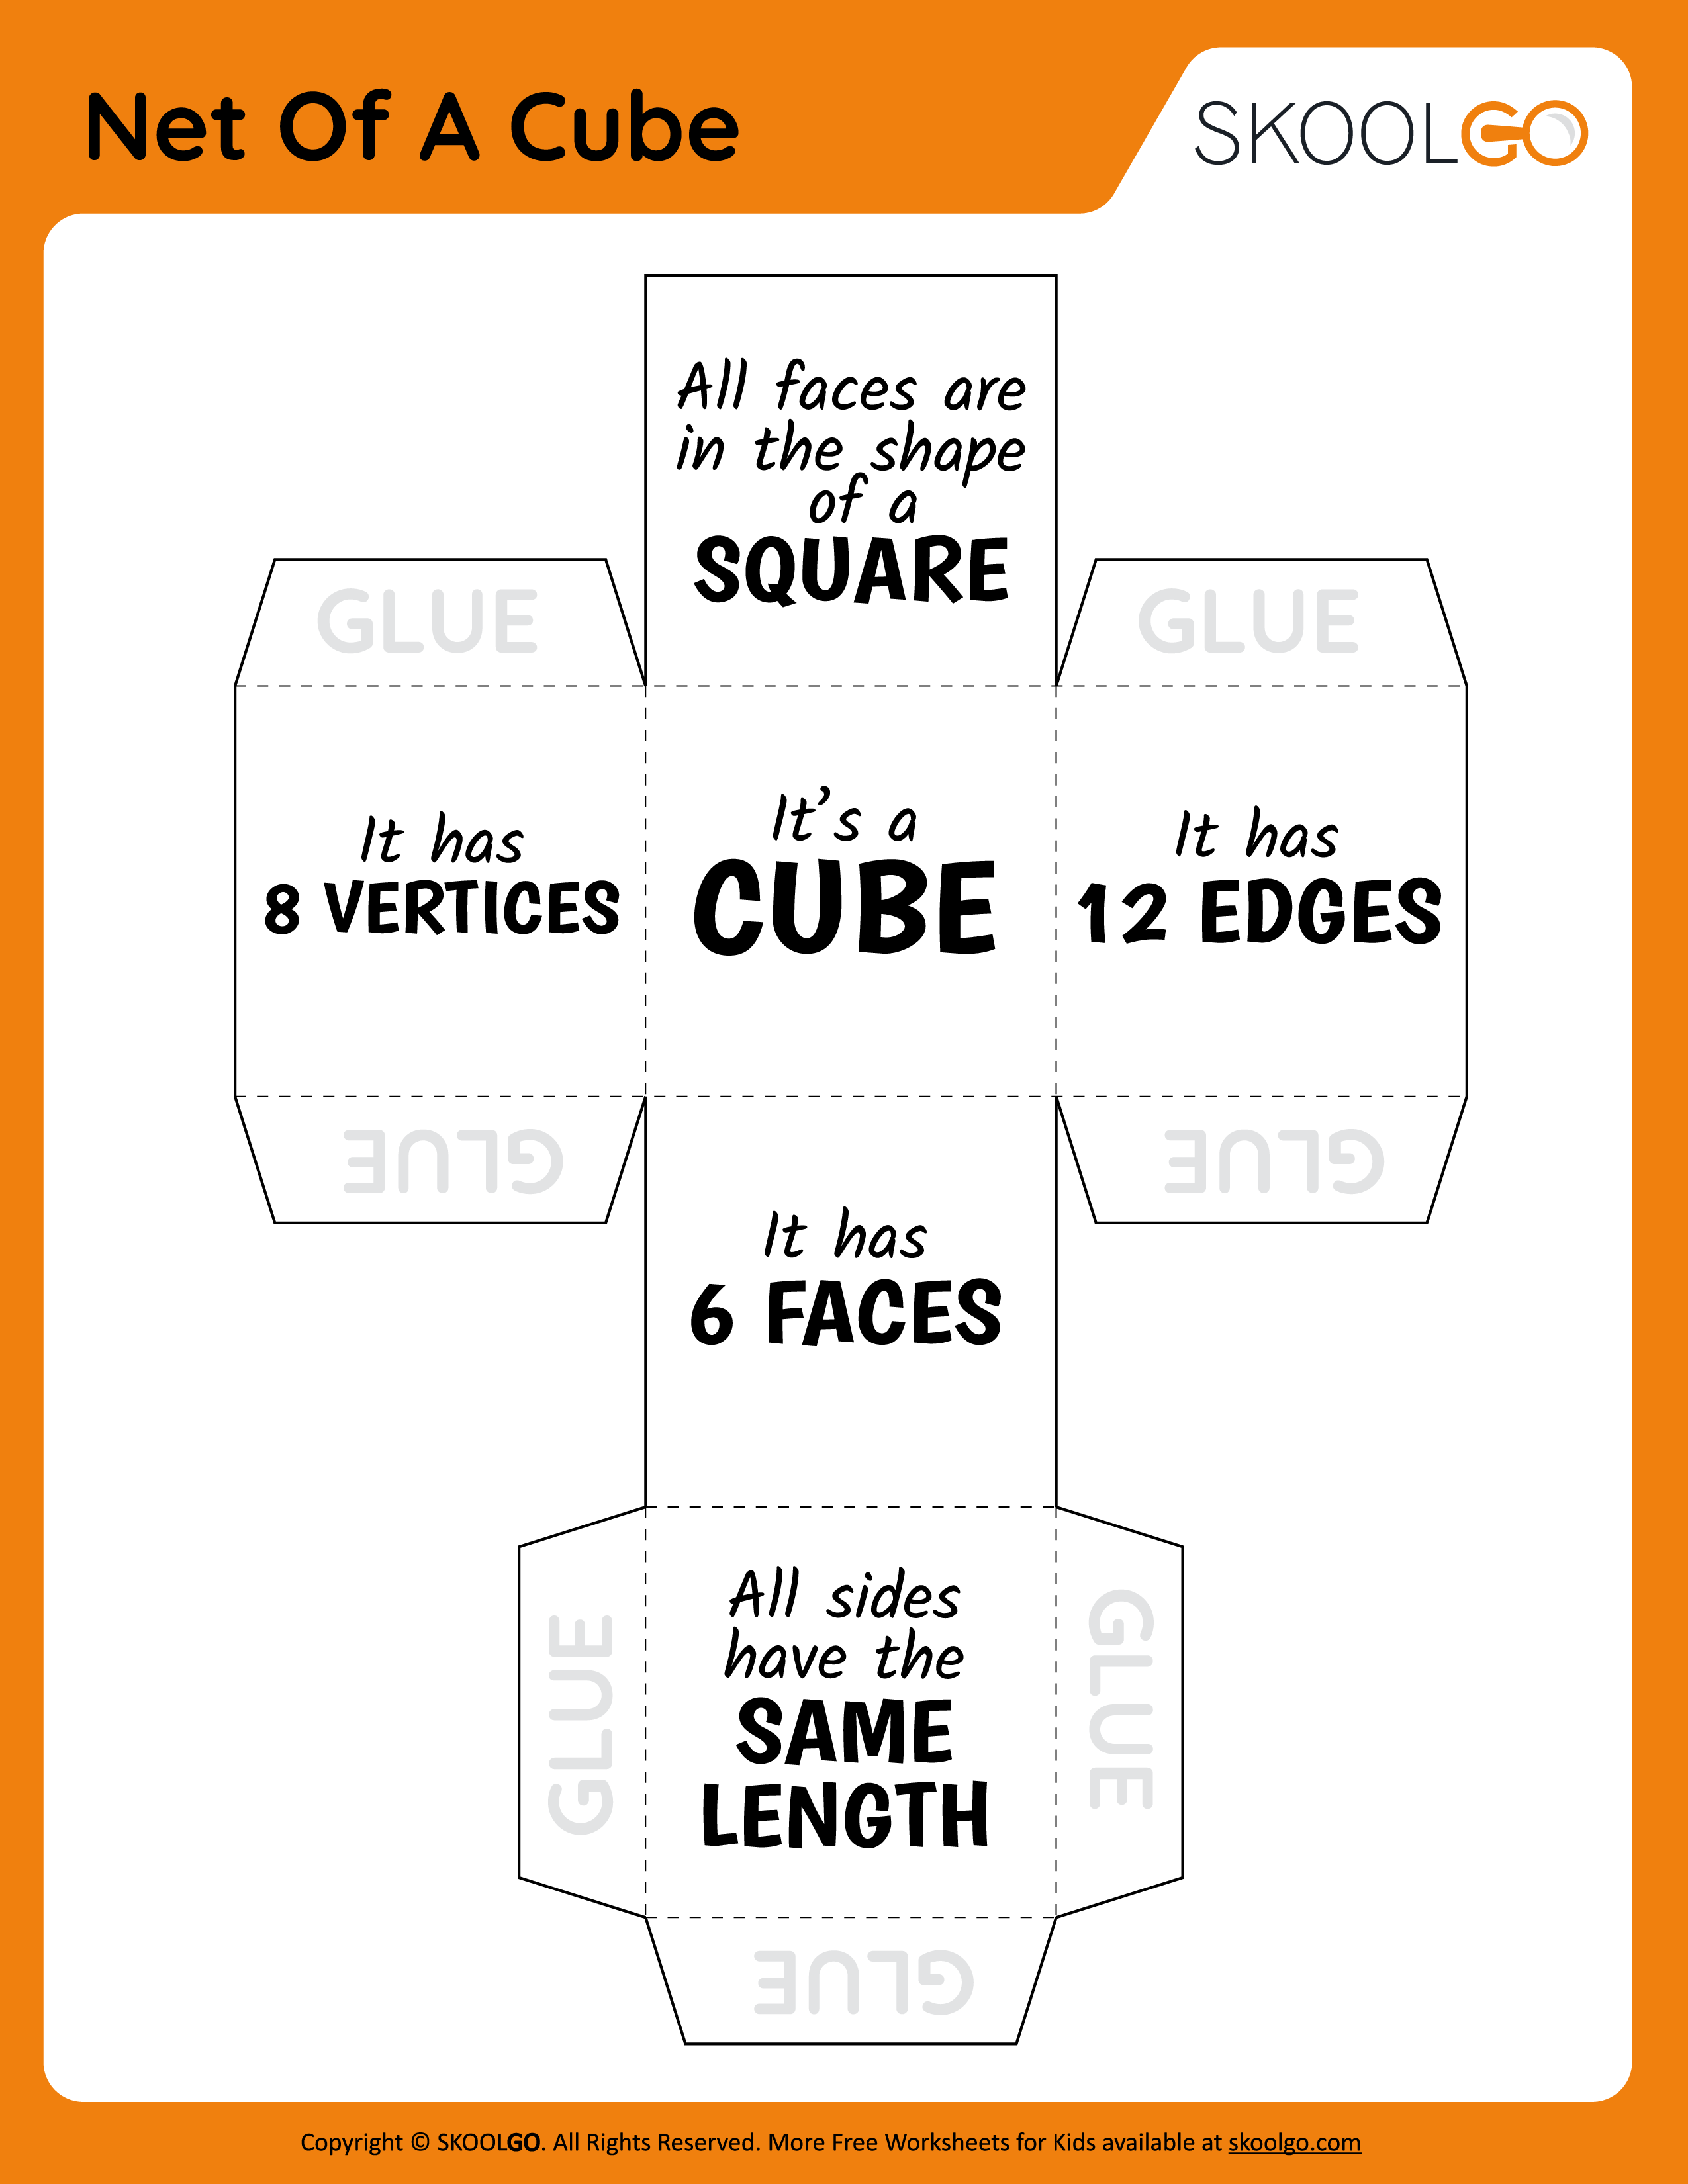 Net Of A Cube - Free Worksheet for Kids